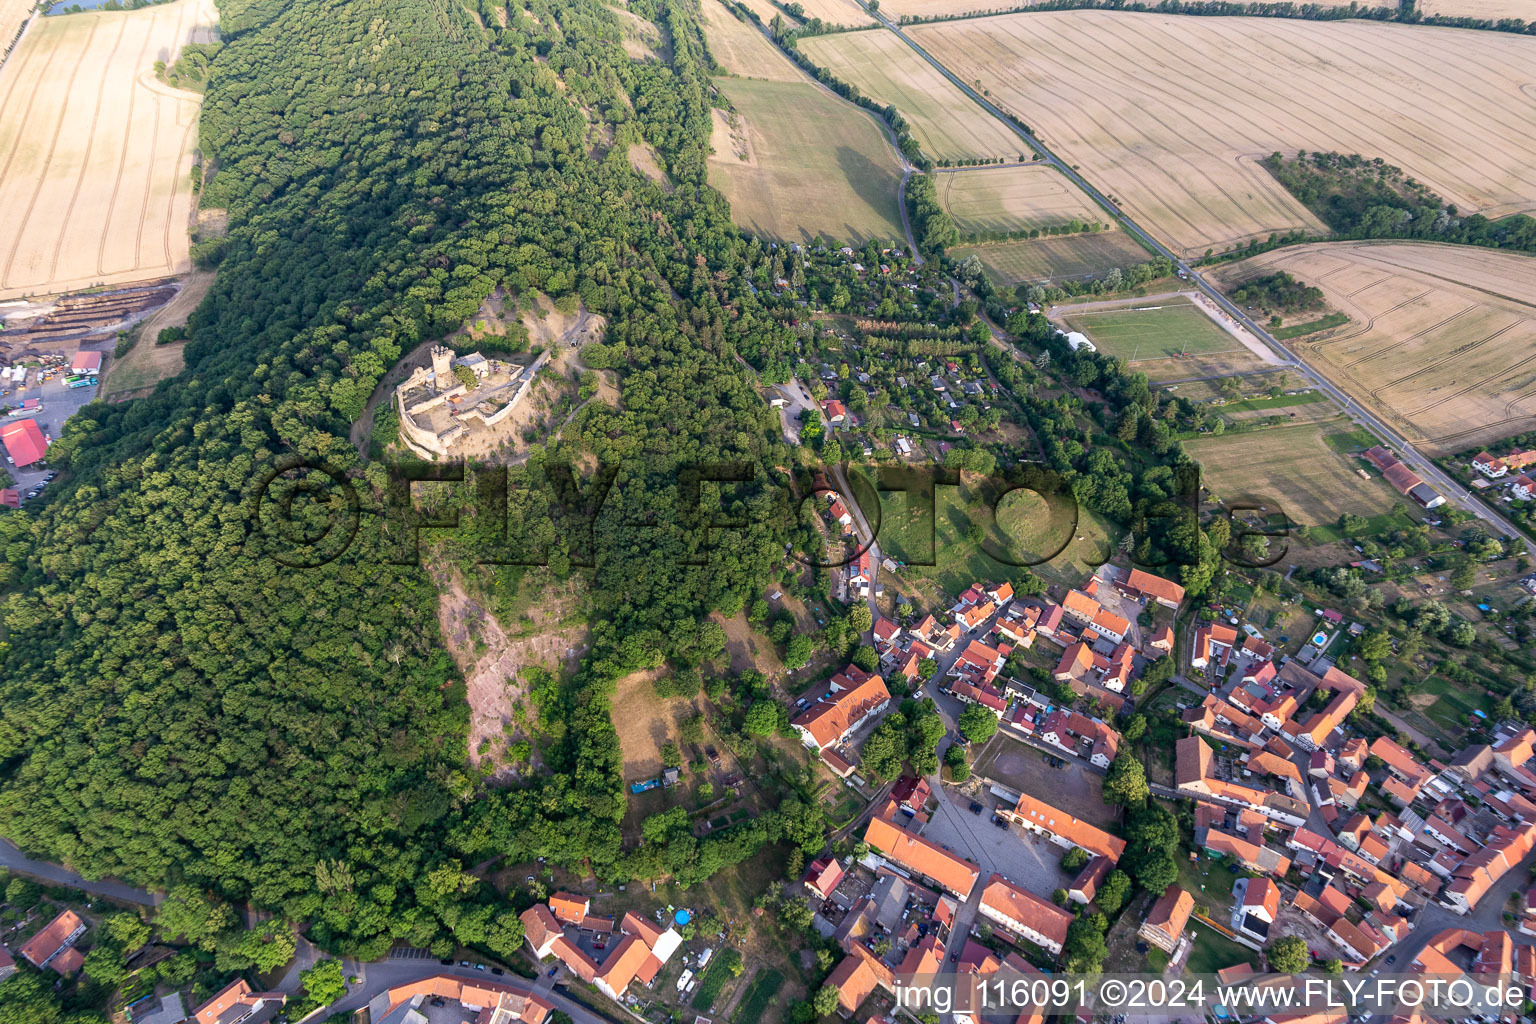 Aerial view of Ruins and vestiges of the former castle and fortress Muehlburg in the district Muehlberg in Drei Gleichen in the state Thuringia, Germany